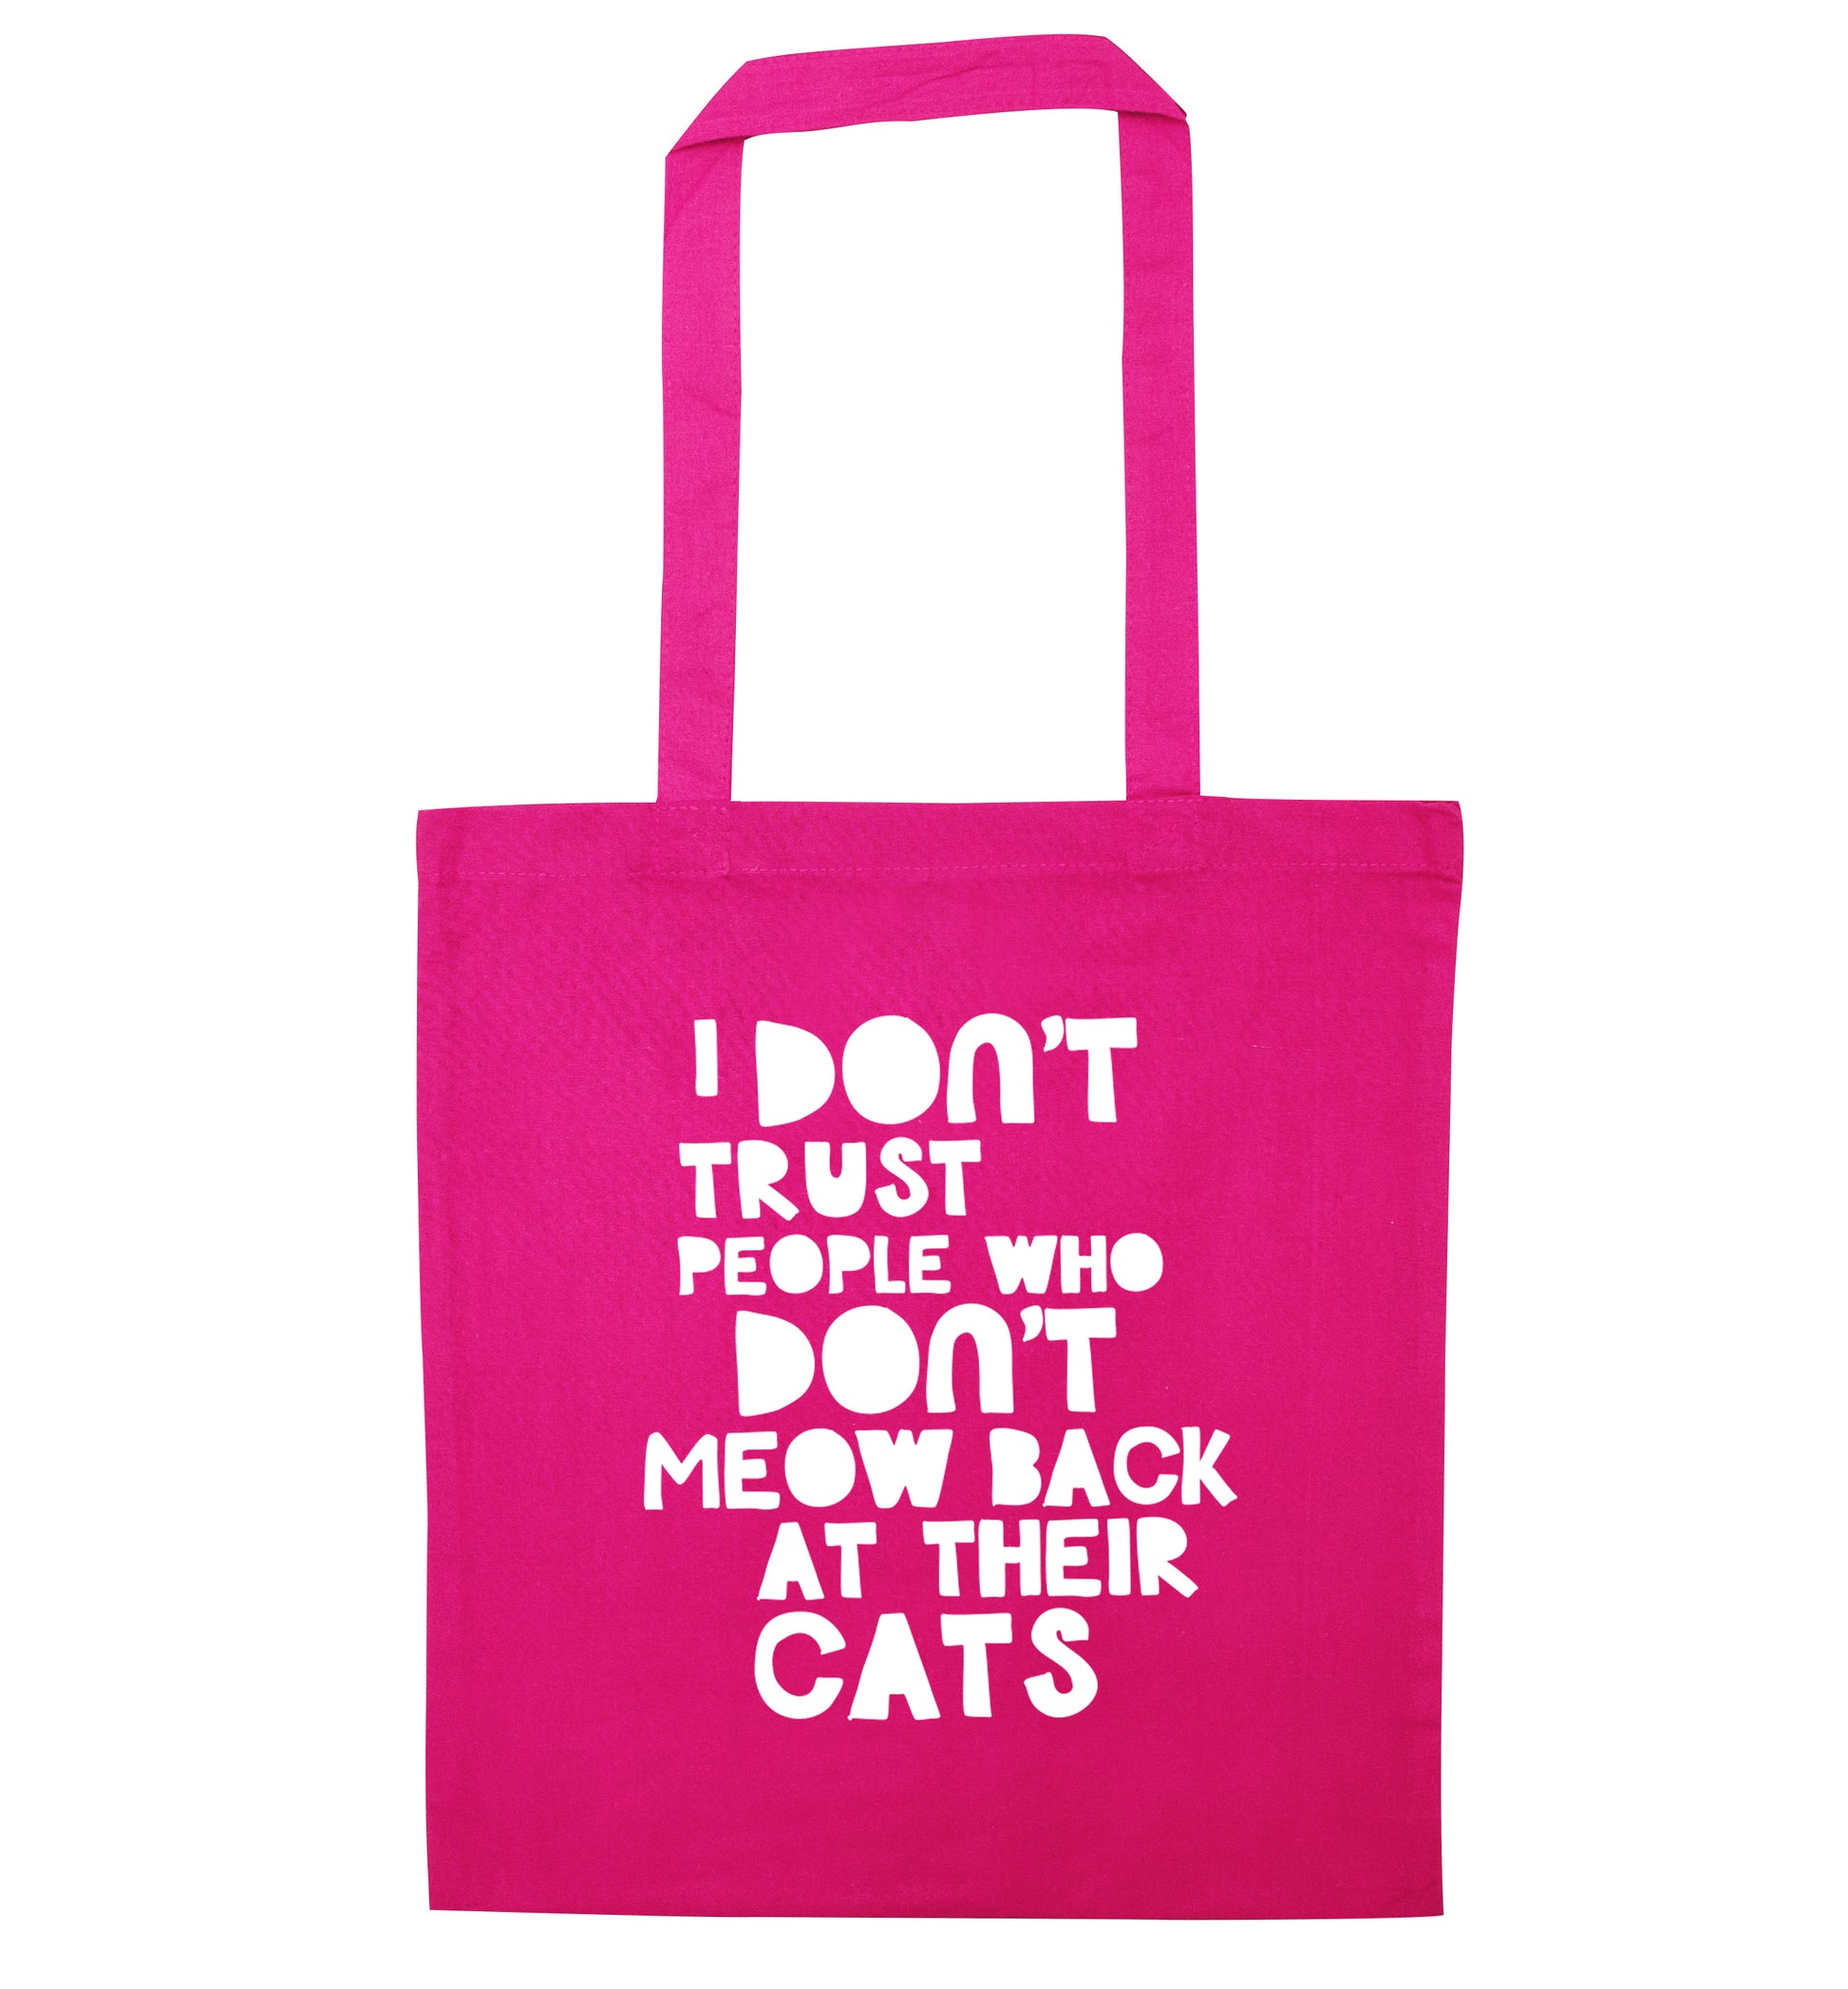 I don't trust people who don't meow back at their cats pink tote bag